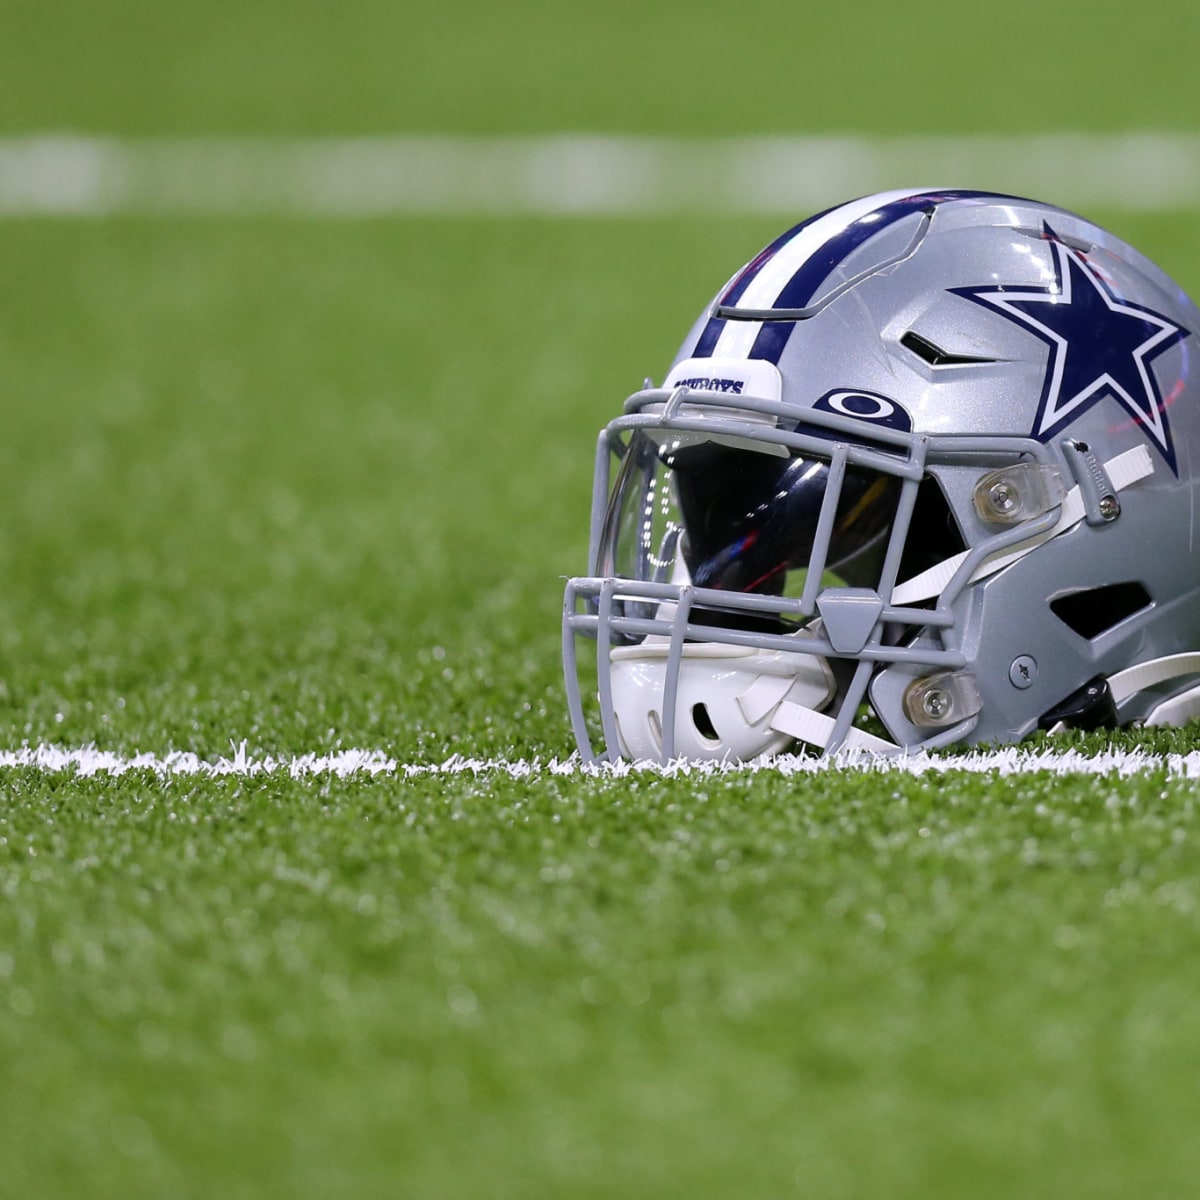 5 Dallas Cowboys who could come out of retirement and play today